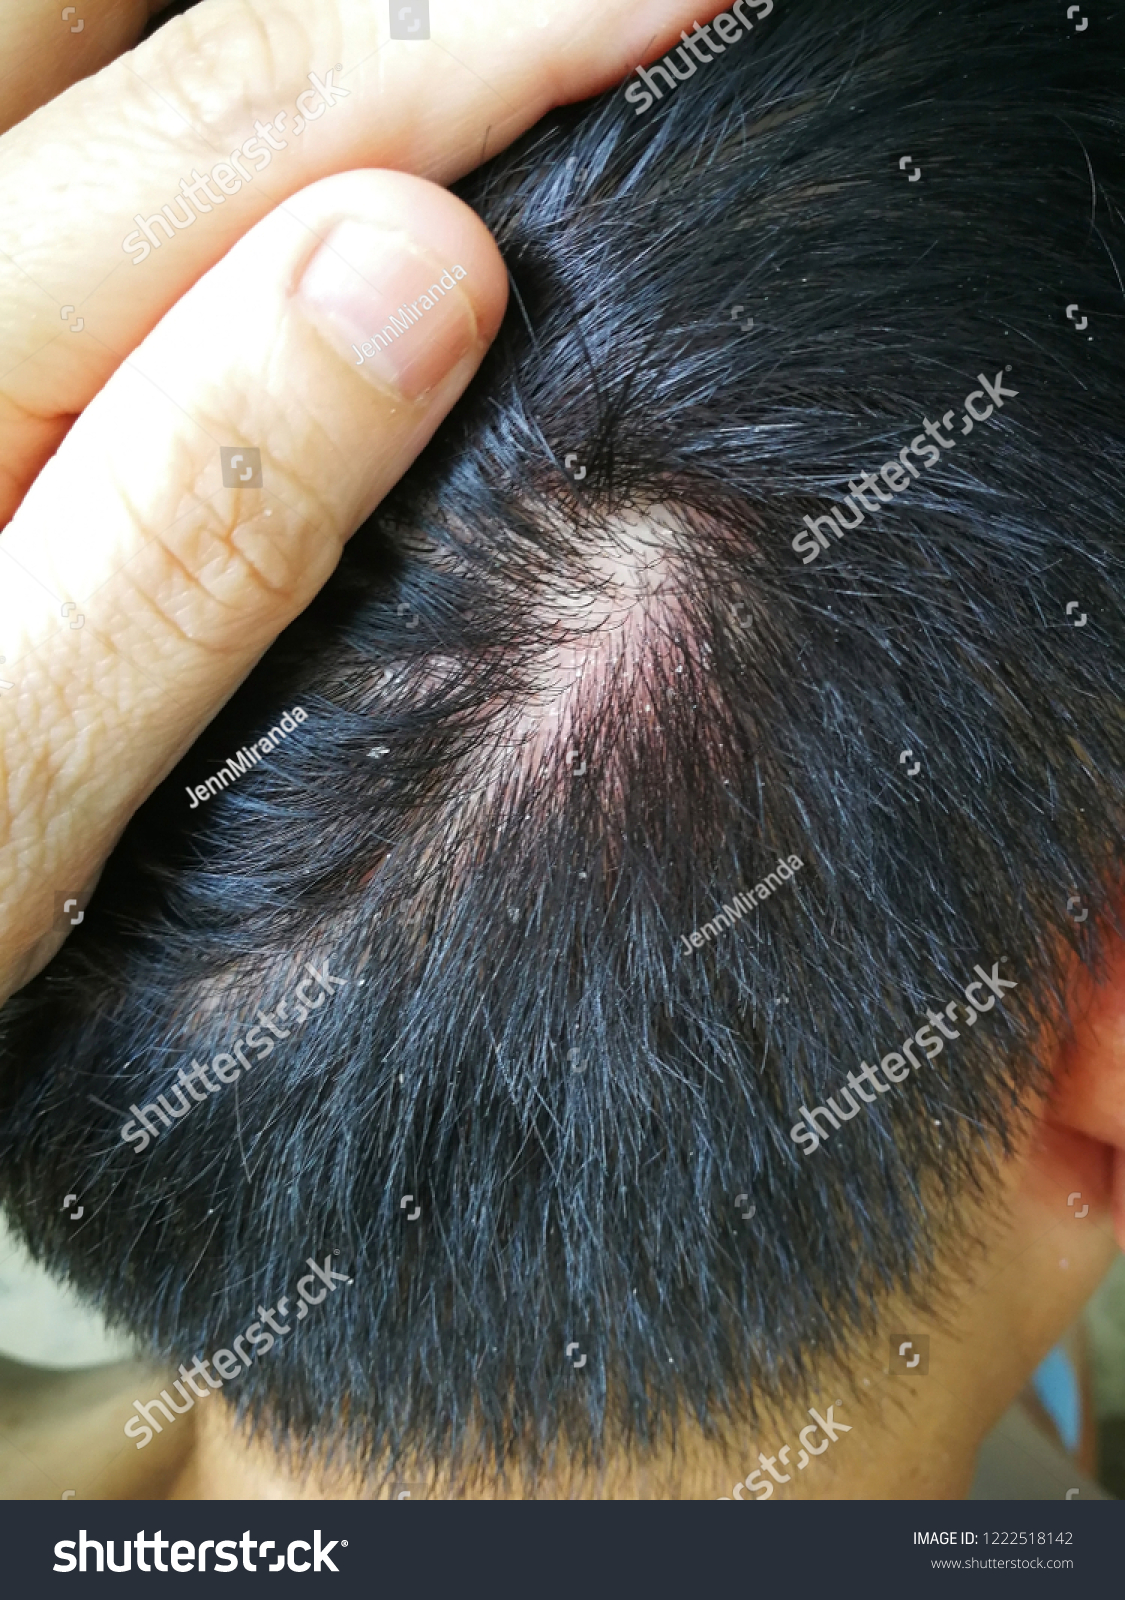 Flakes Itchy Scaly Scalp Main Symptoms Stock Photo Edit Now 1222518142